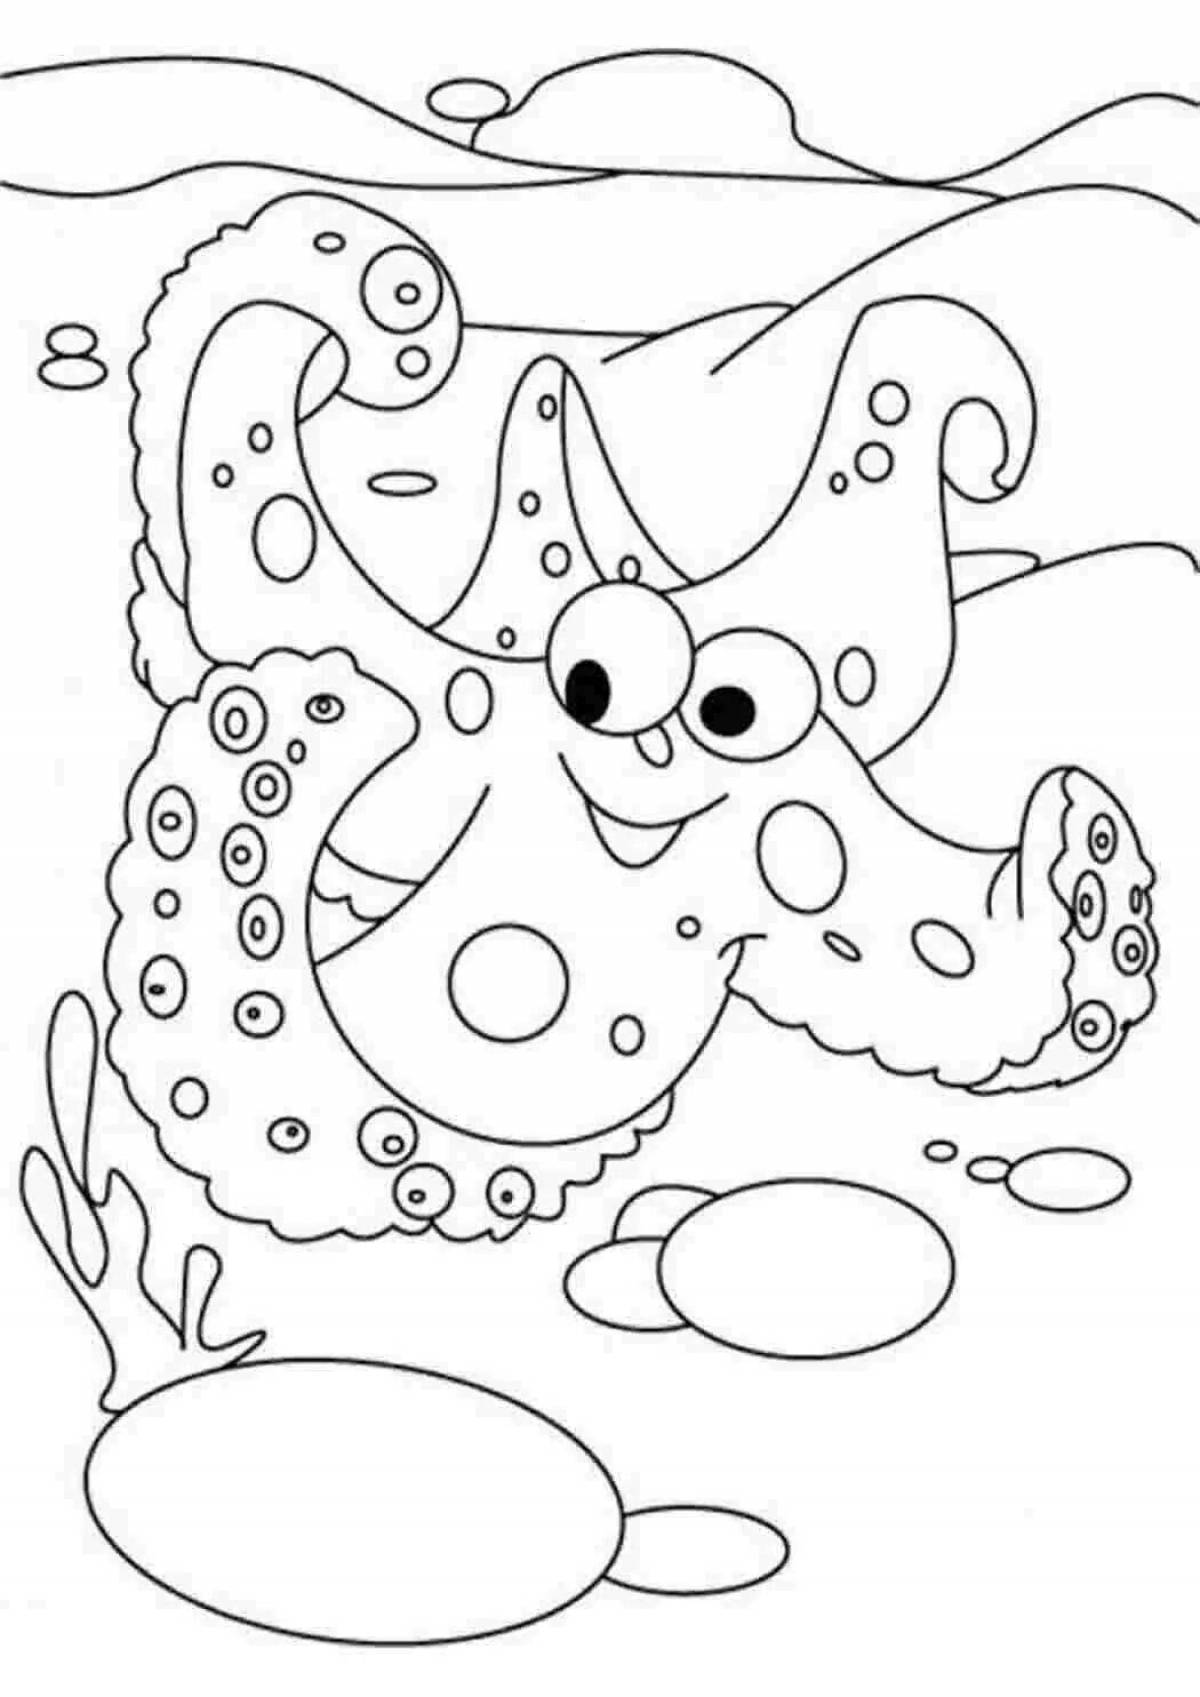 A fun starfish coloring book for kids